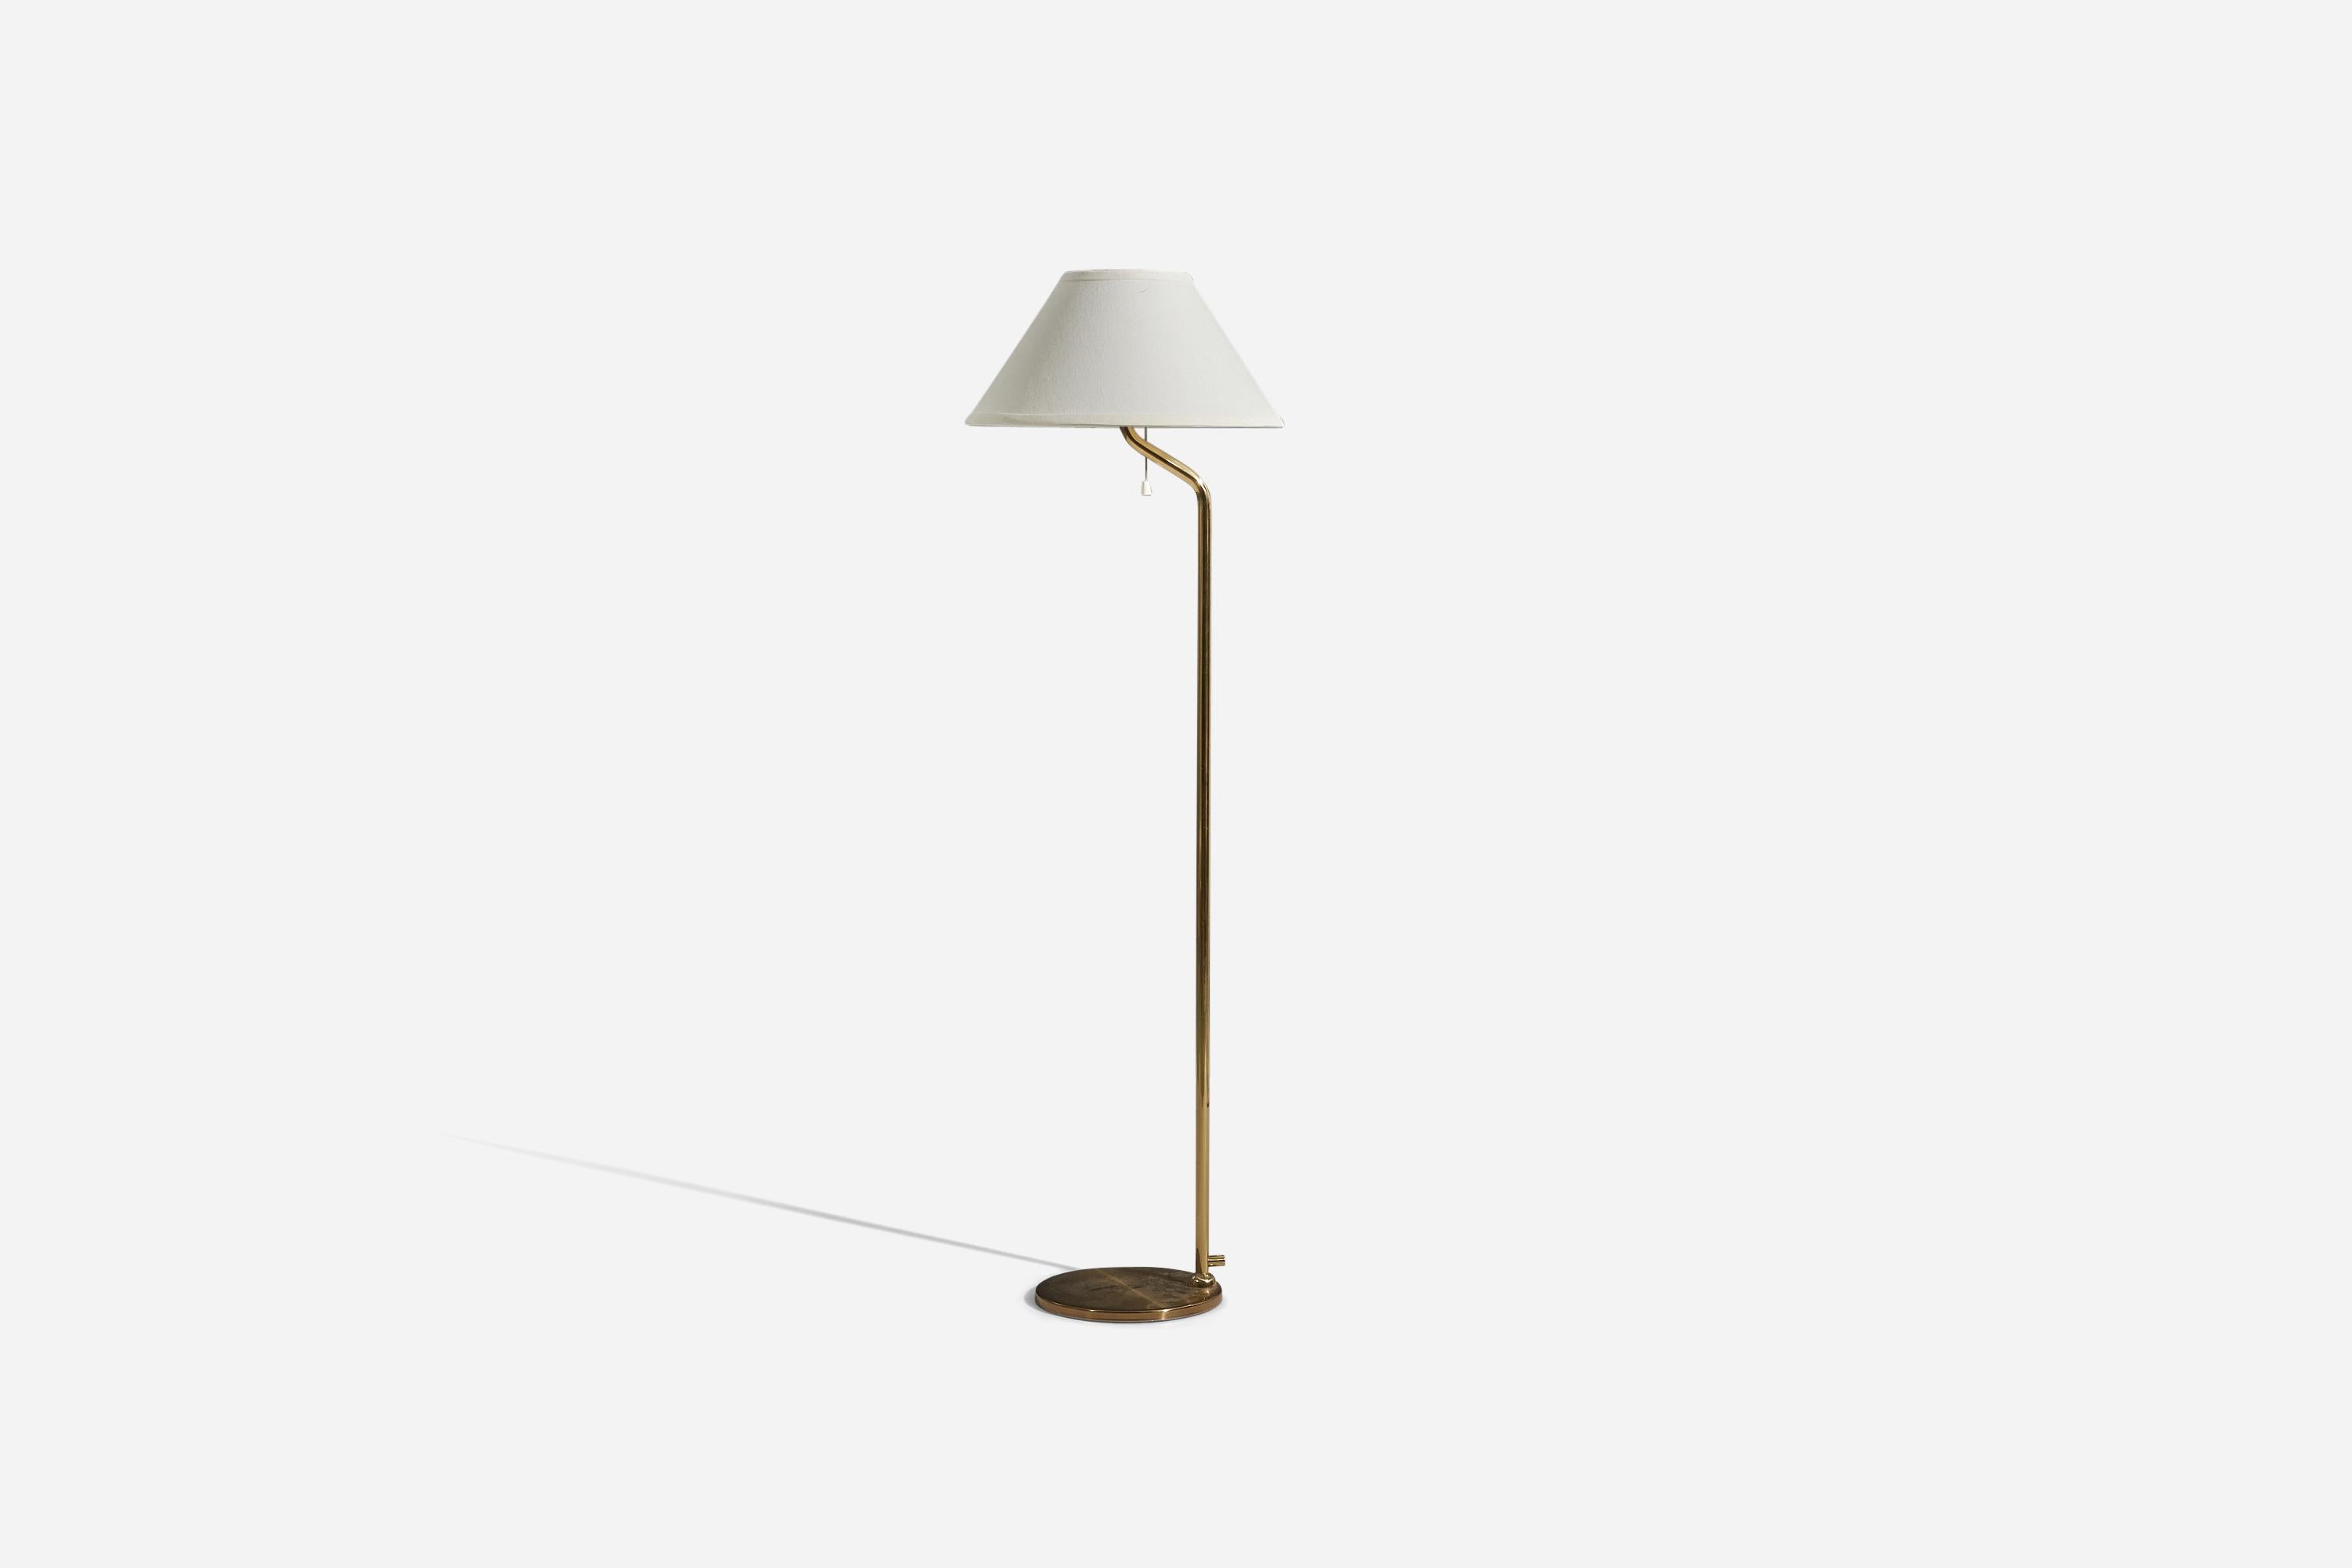 A brass floor lamp designed and produced by a Swedish designer, Sweden, c. 1970s.

Sold with lampshade 
Dimensions of floor lamp (inches) : 44.5 x 8.6875 x 8.6875 (H x W x D)
Dimensions of shade (inches) : 5.75 x 14 x 8 (T x B x H)
Dimensions